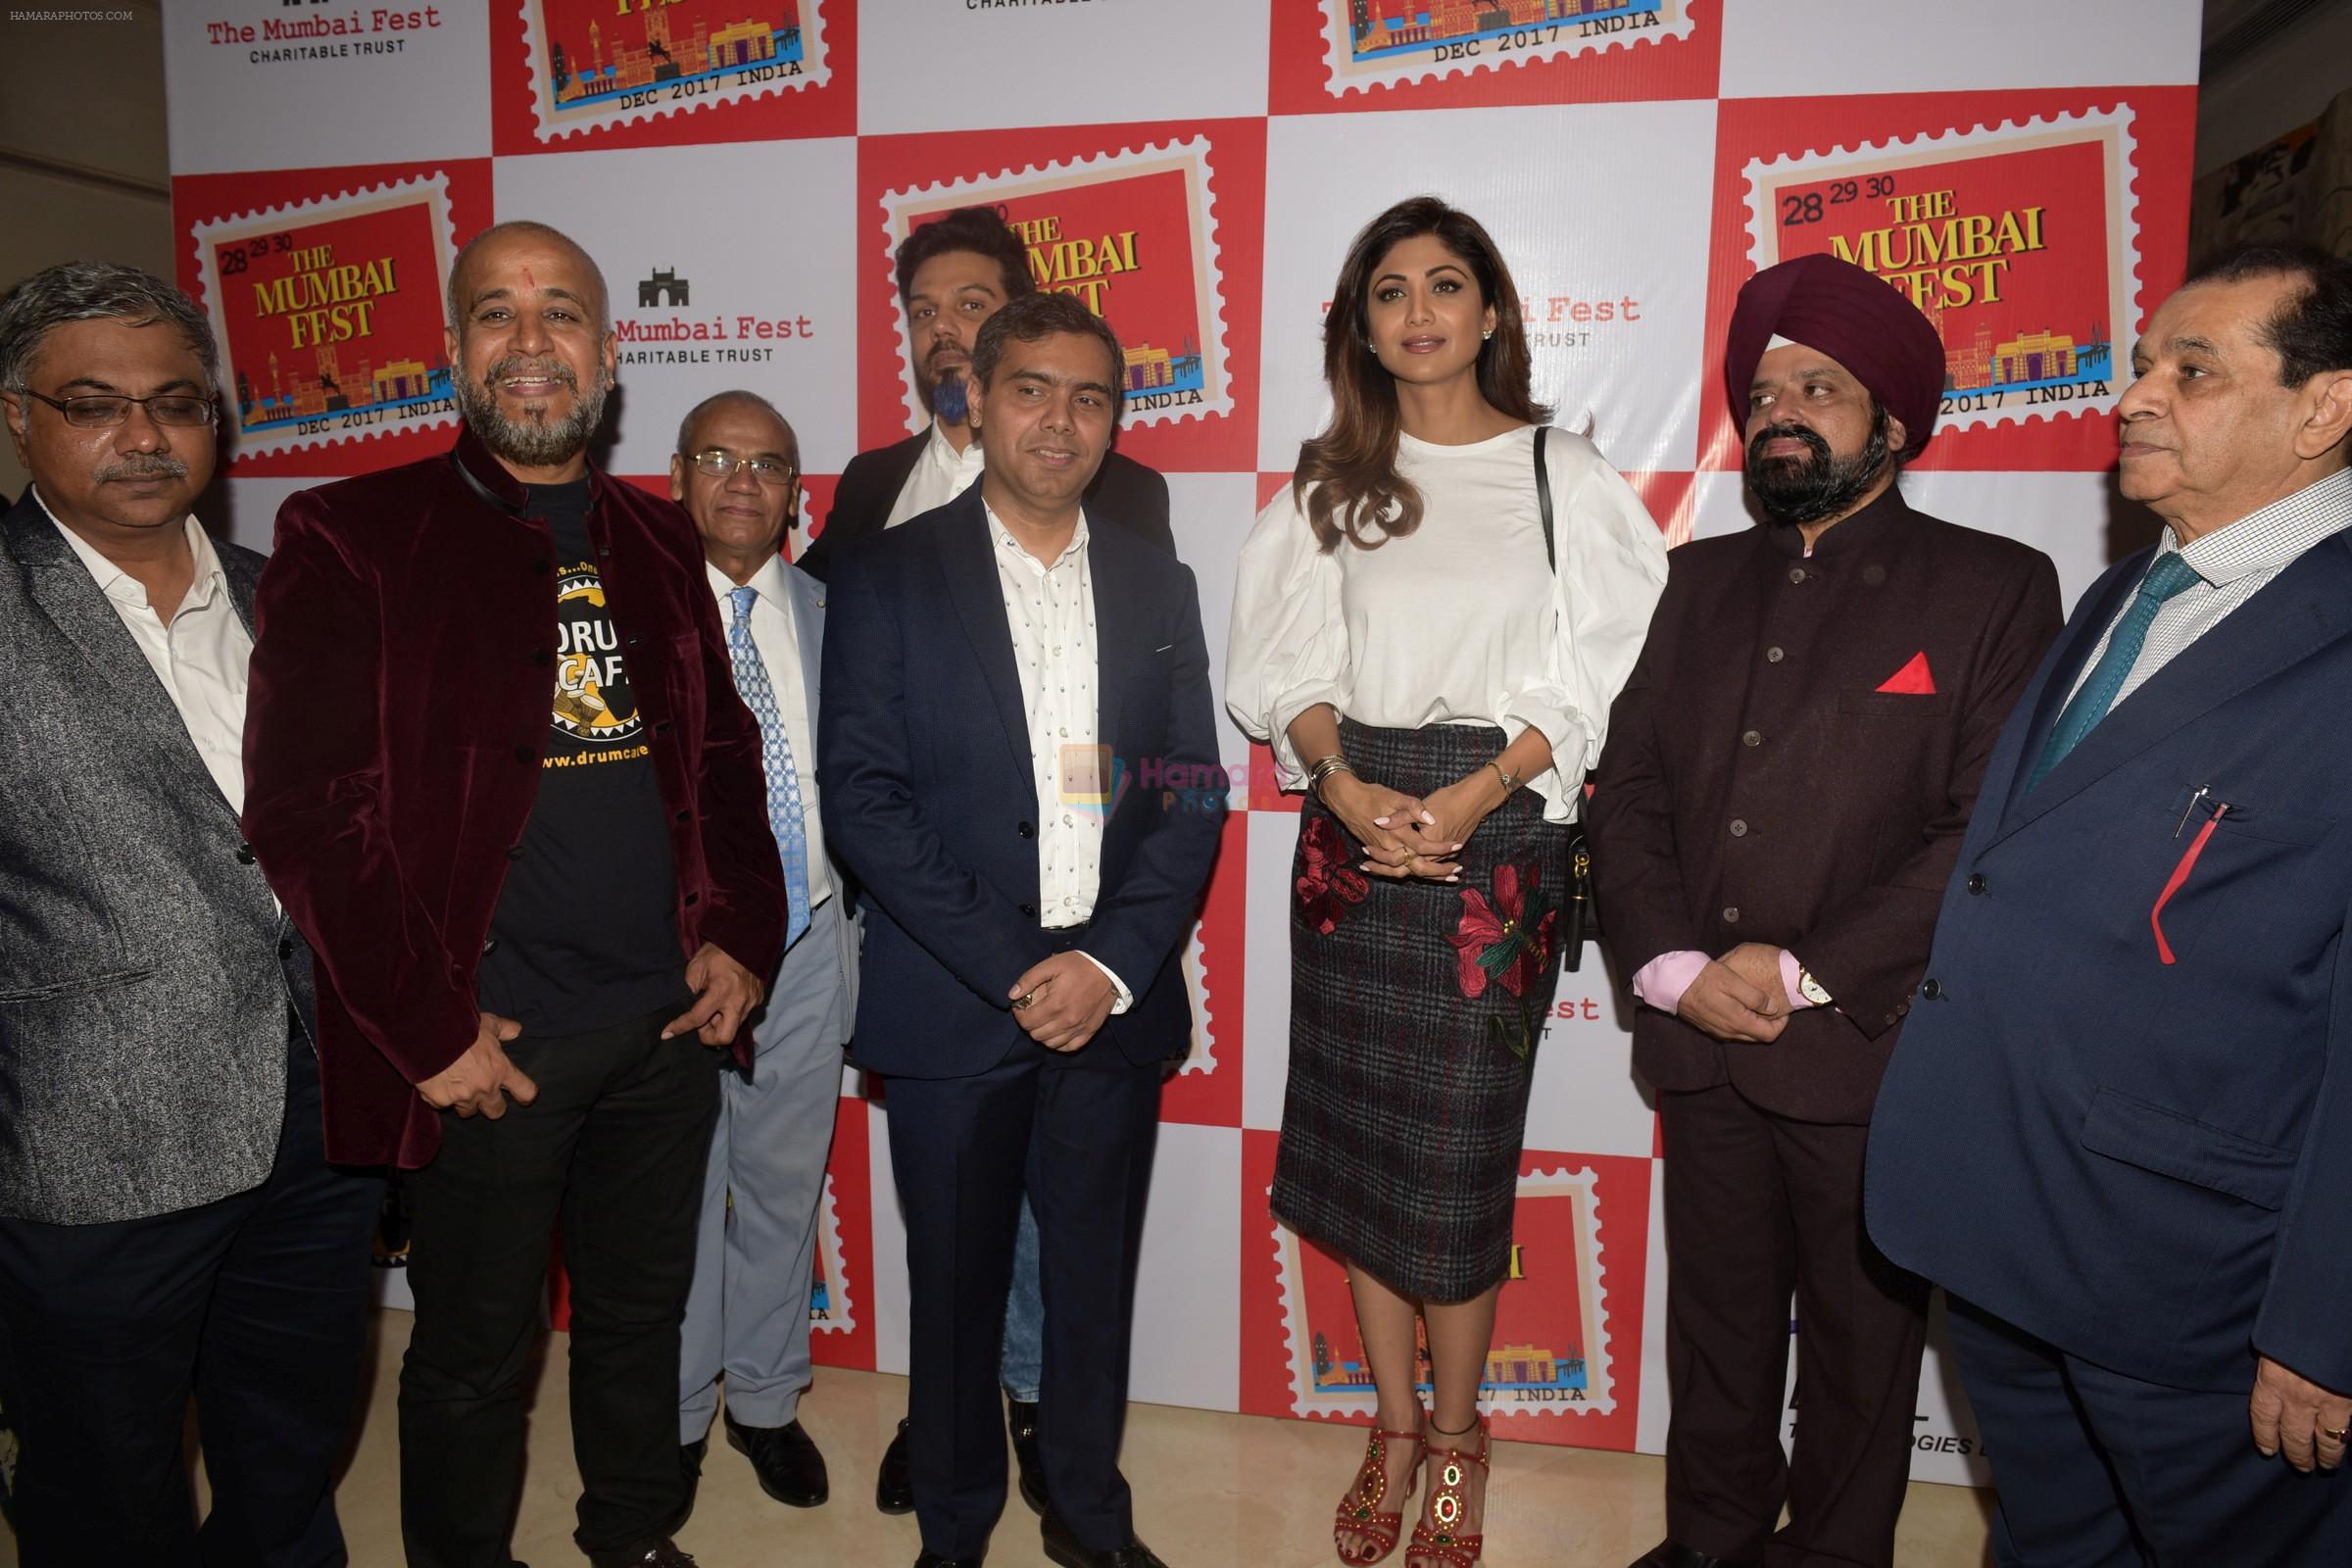 Shilpa Shetty Kundra with Team at the Unveiling & Announcement of The Mumbai Fest 2017 on 6th Nov 2017